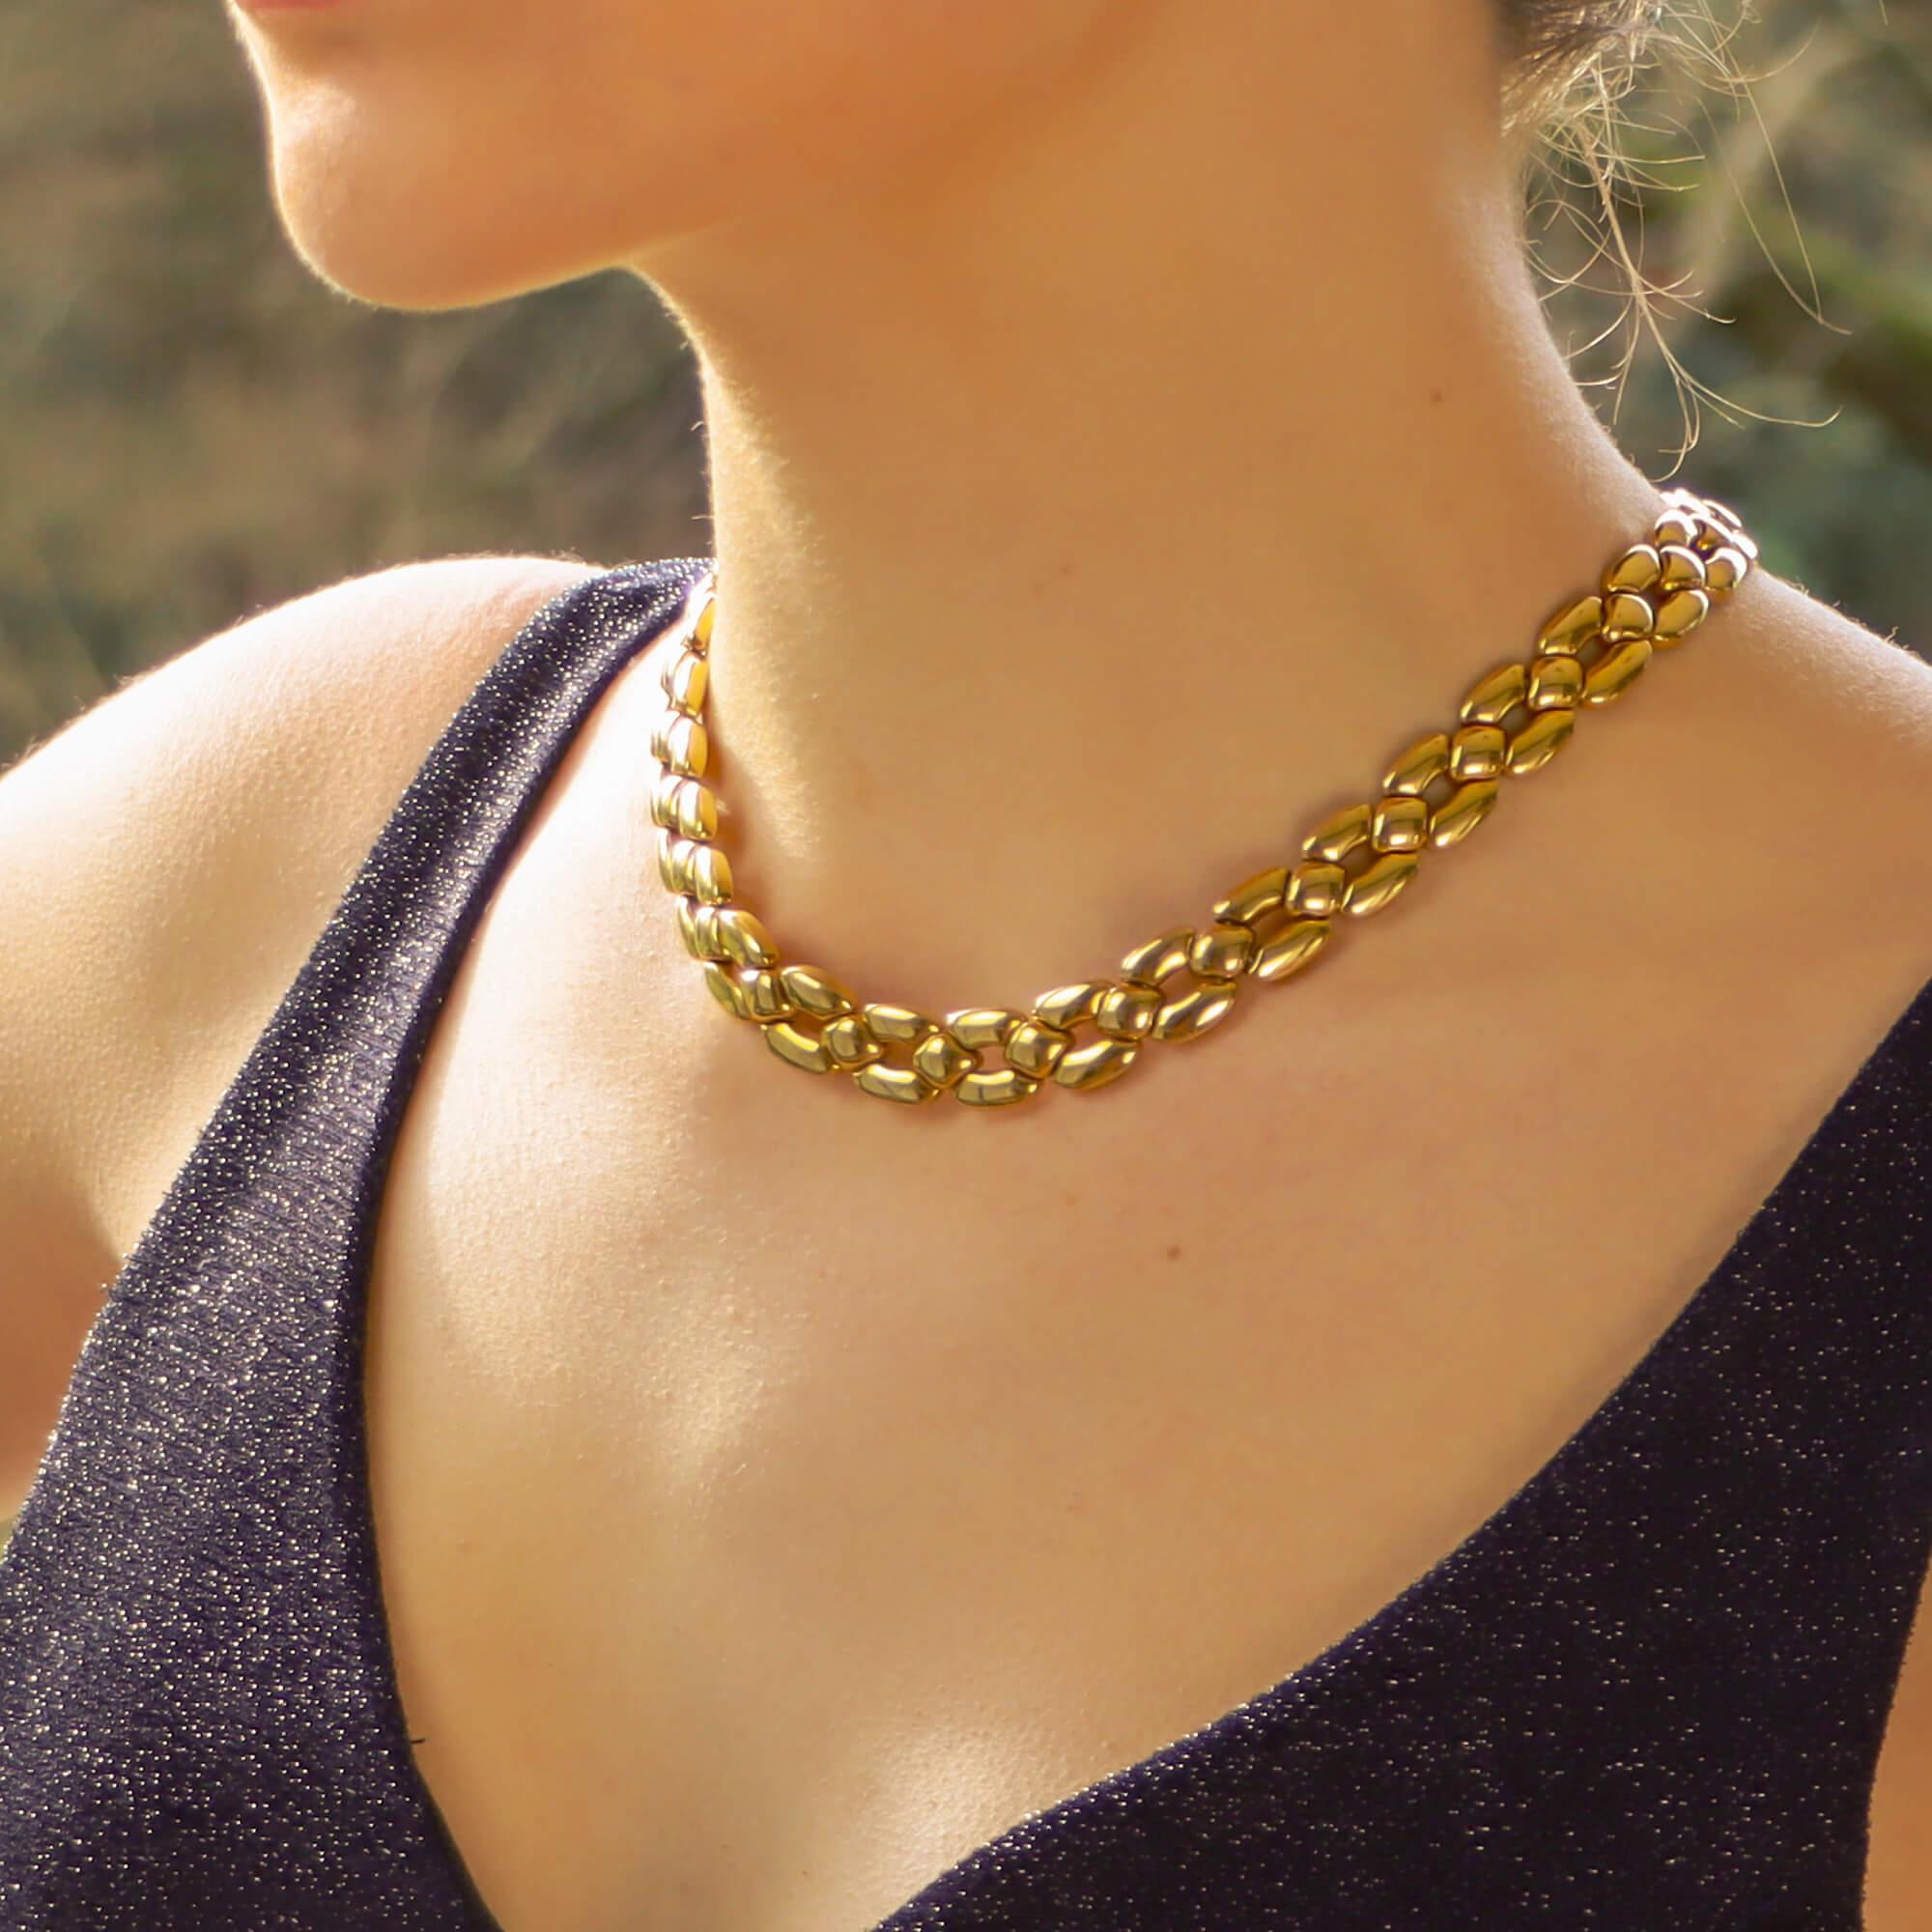 A beautiful and elegant Cartier chunky link necklace set in 18k yellow gold.

The necklace is composed of a honeycomb brick link design and sits beautifully once on the neck and feels fabulous to wear. Due to the design of the necklace it could